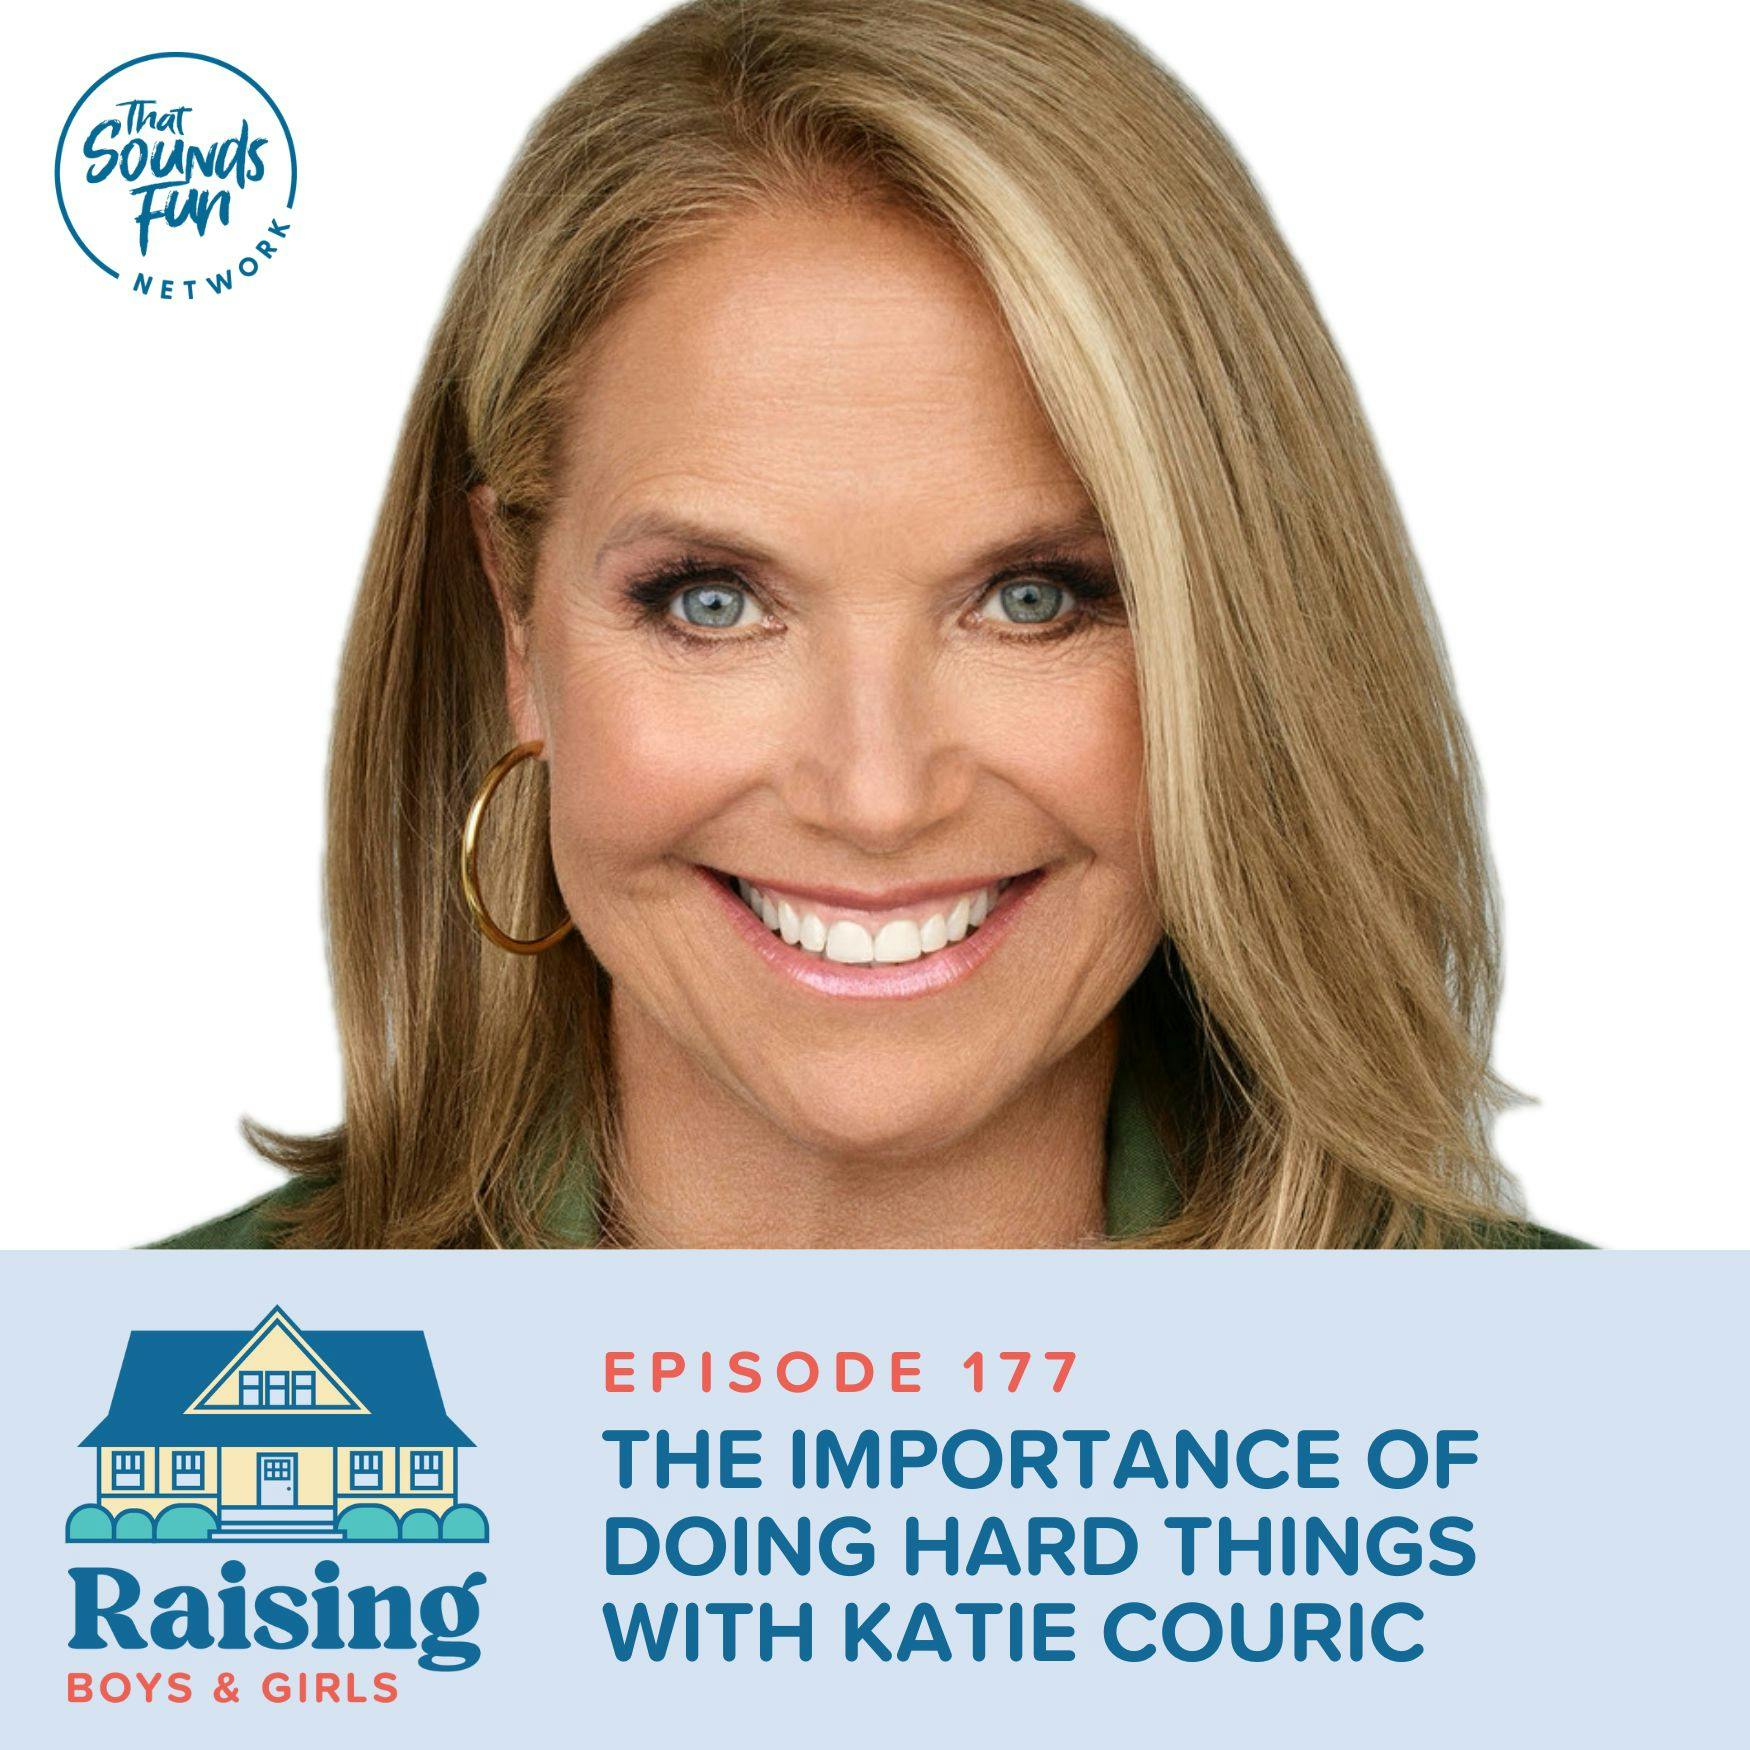 Episode 177: The Importance of Doing Hard Things with Katie Couric